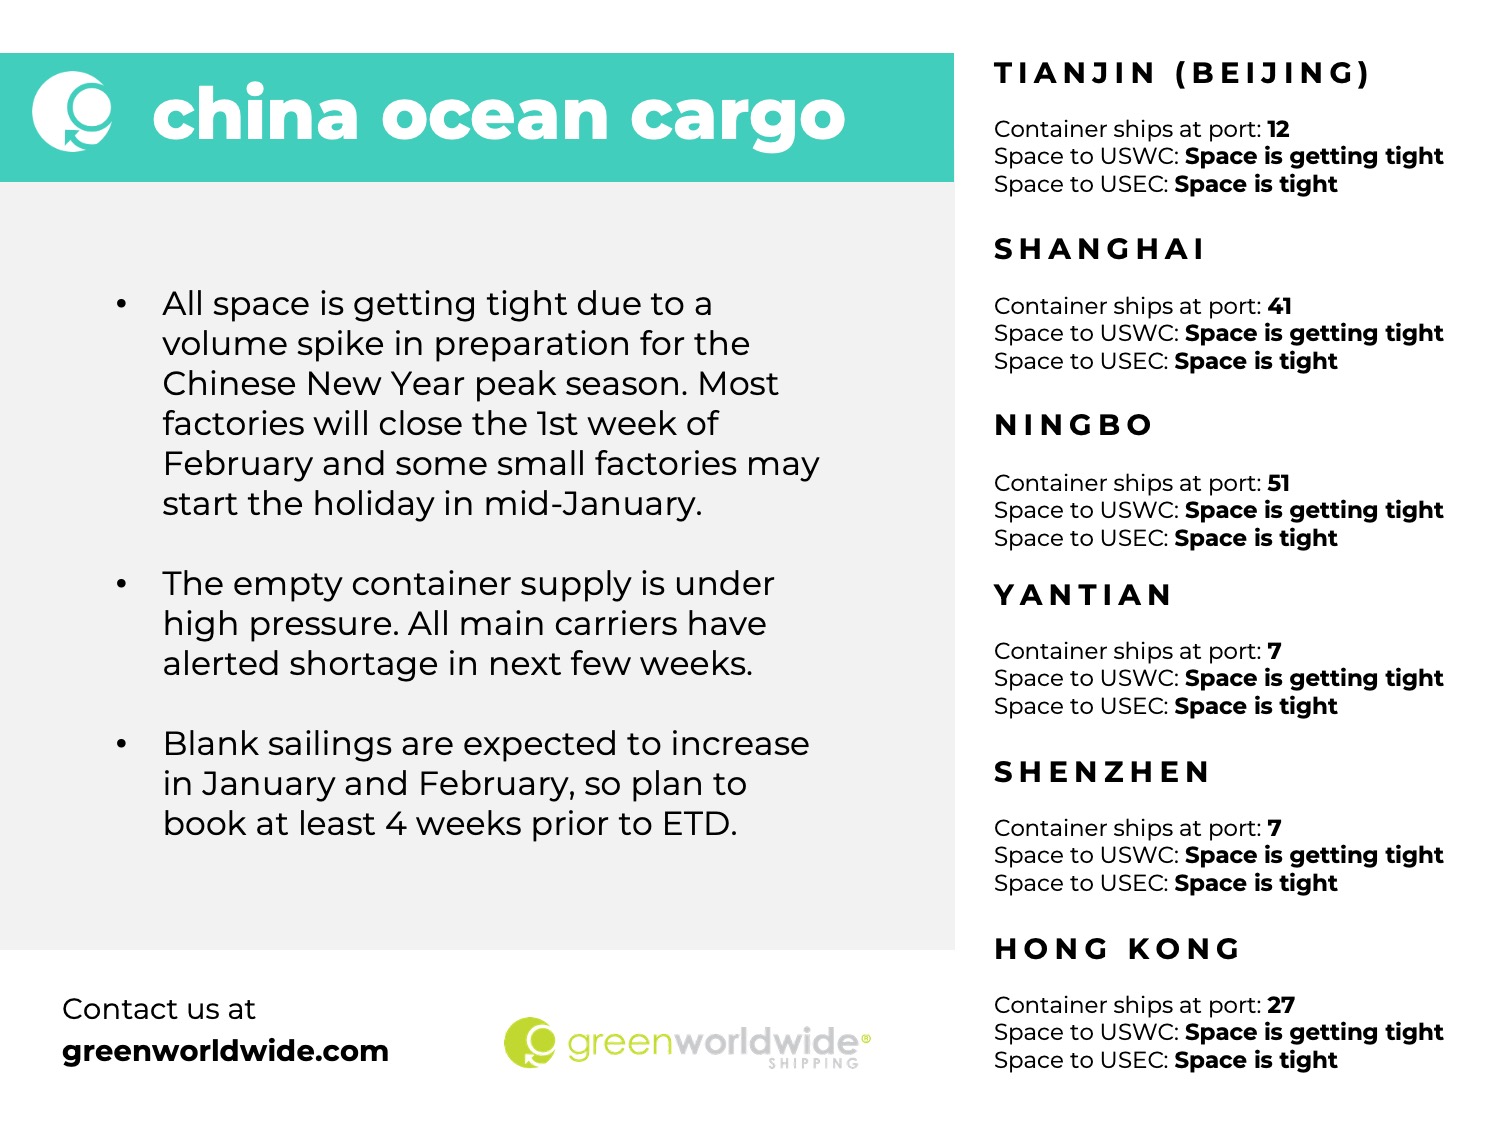 china ocean cargo All space is getting tight due to a volume spike in preparation for the Chinese New Year peak season. Most factories will close the 1st week of February and some small factories may start the holiday in mid-January. The empty container supply is under high pressure. All main carriers have alerted shortage in next few weeks. Blank sailings are expected to increase in January and February, so plan to book at least 4 weeks prior to ETD. TIANJIN (BEIJING) Container ships at port: 12 Space to USWC: Space is getting tight Space to USEC: Space is tight SHANGHAI Container ships at port: 41 Space to USWC: Space is getting tight Space to USEC: Space is tight NINGBO Container ships at port: 51 Space to USWC: Space is getting tight Space to USEC: Space is tight YANTIAN Container ships at port: 7 Space to USWC: Space is getting tight Space to USEC: Space is tight SHENZHEN Container ships at port: 7 Space to USWC: Space is getting tight Space to USEC: Space is tight HONG KONG Container ships at port: 27 Space to USWC: Space is getting tight Space to USEC: Space is tight Contact us at greenworldwide.com